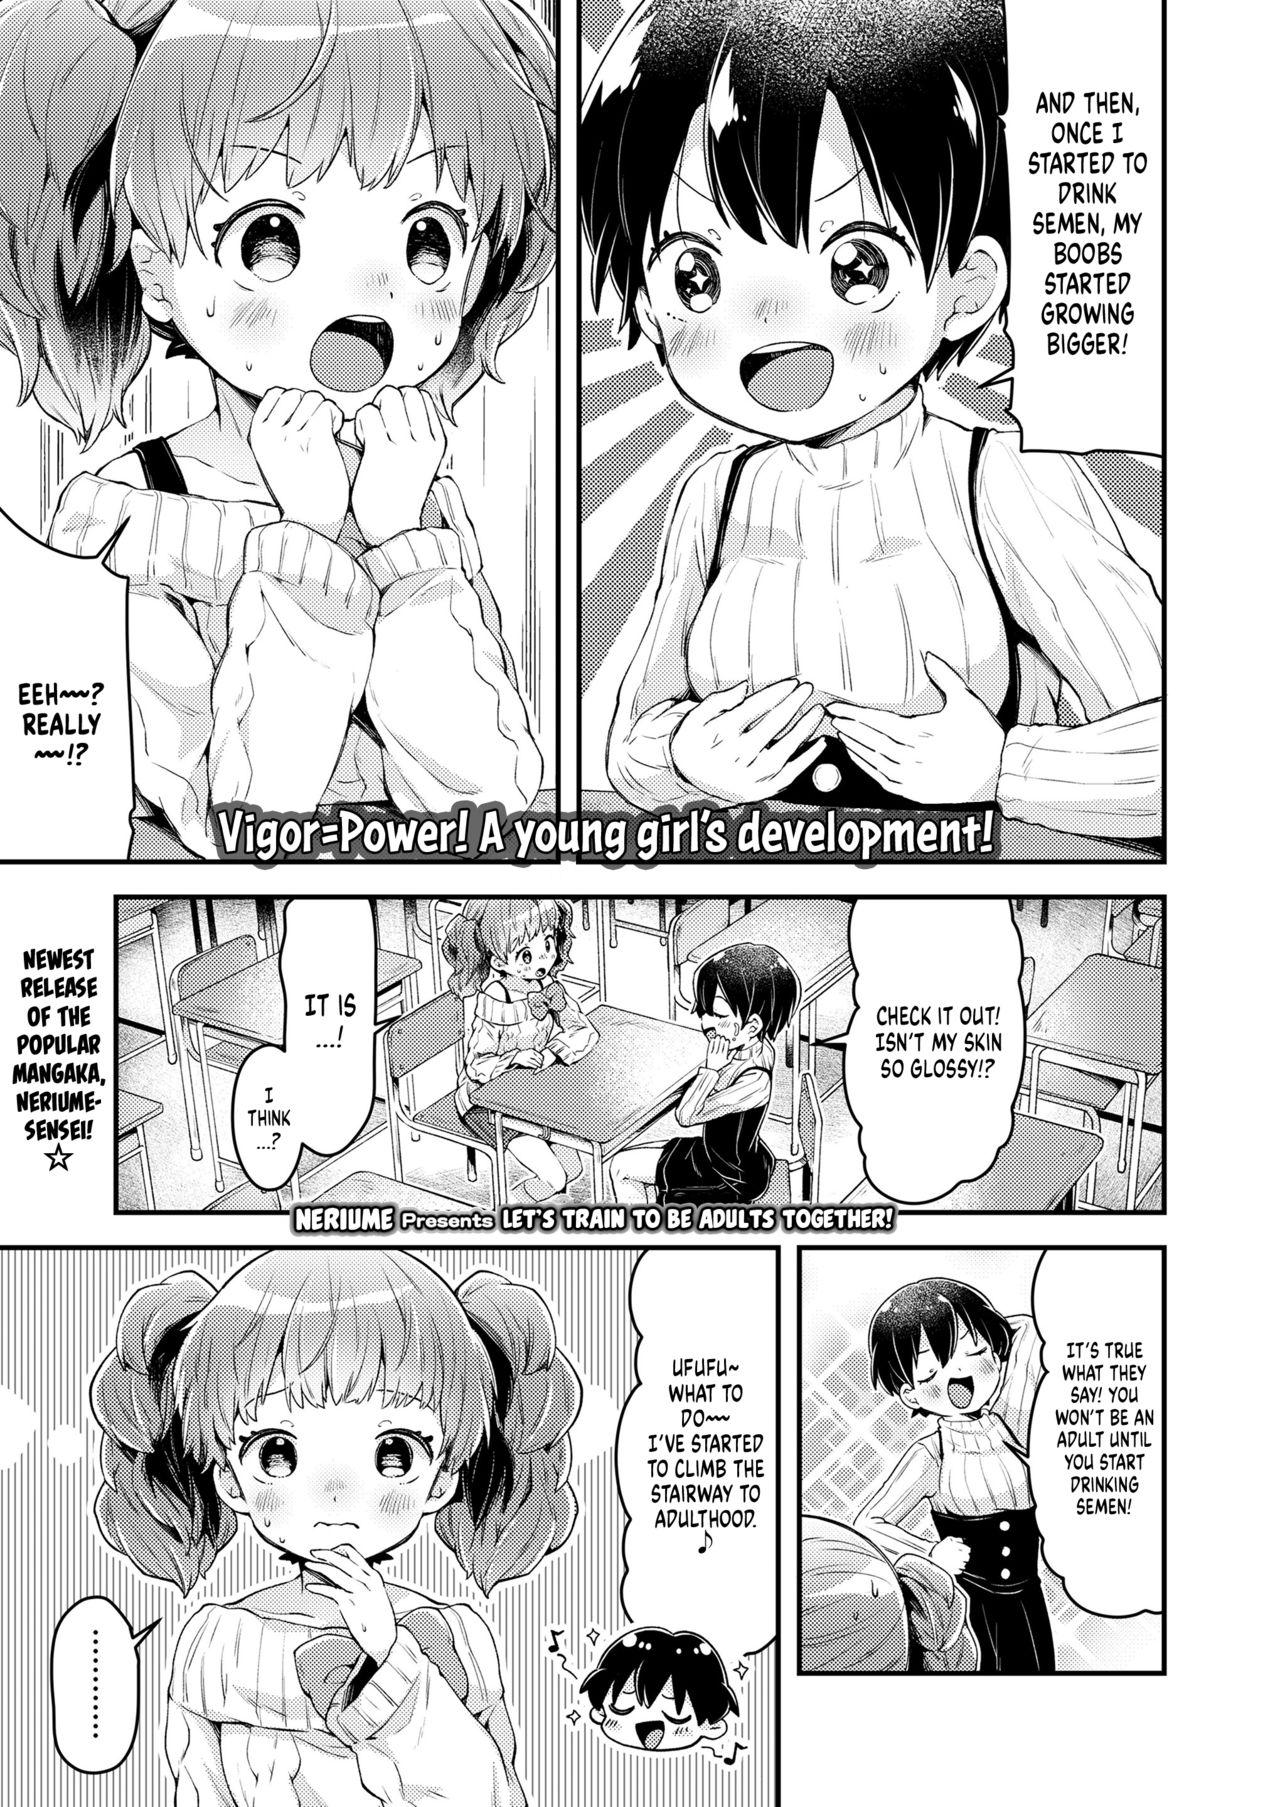 Double Issho ni Otona Training! | Let's Train to be Adults Together! Uniform - Page 1